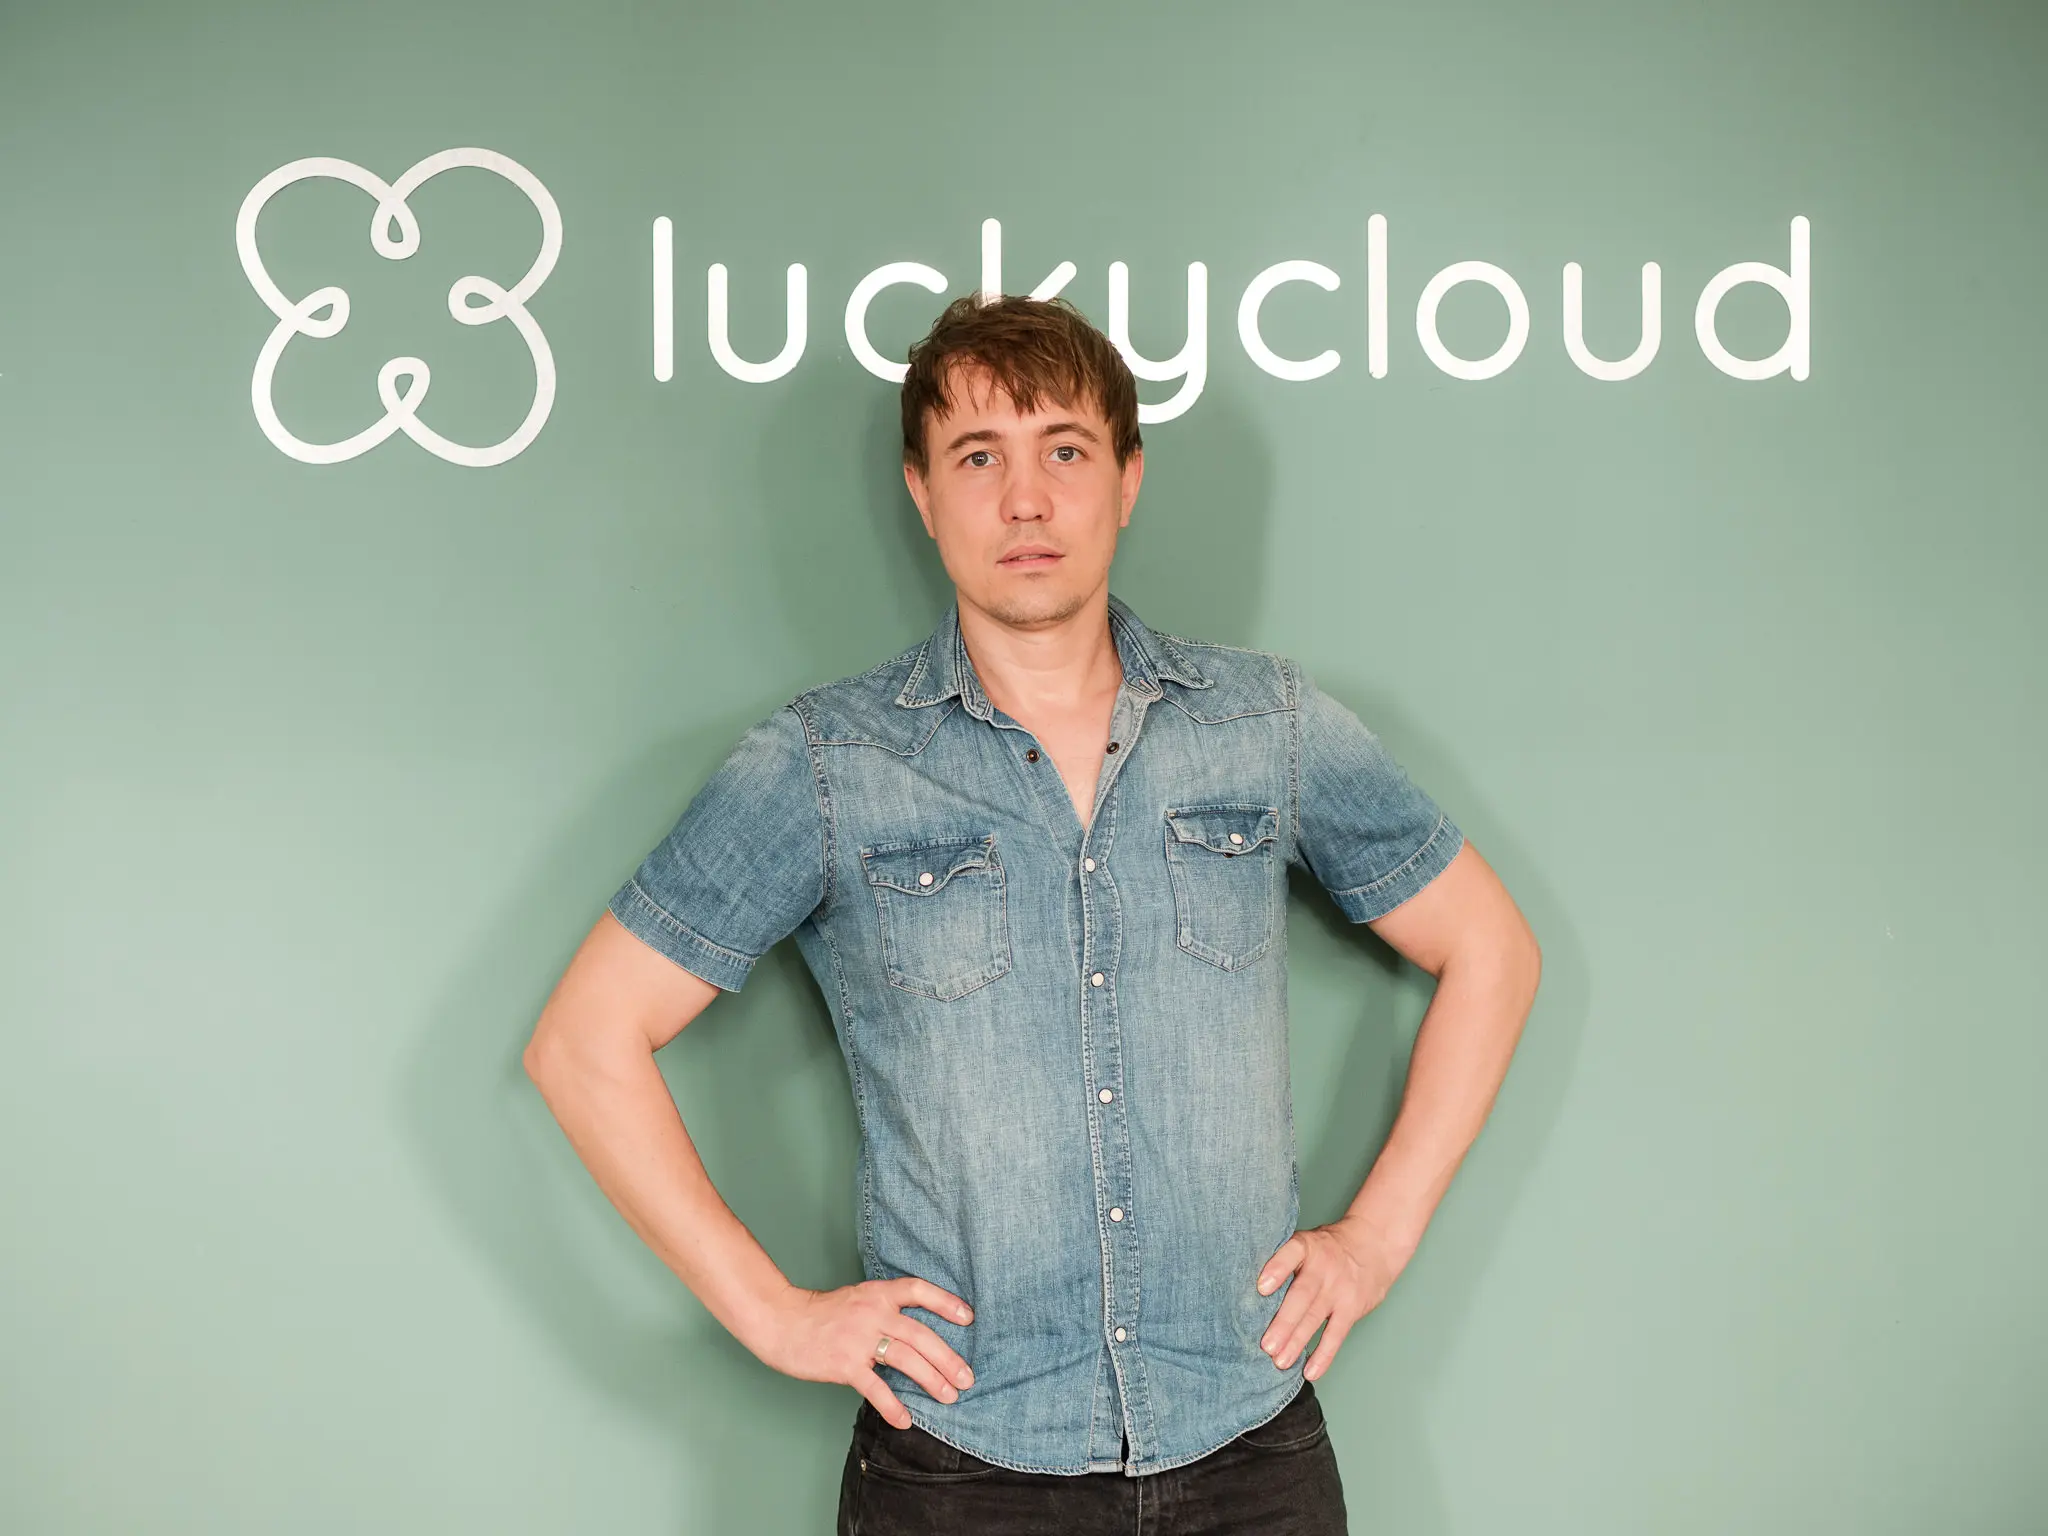 The founder of luckycloud poses with his hands in his hips in front of the logo and lettering.